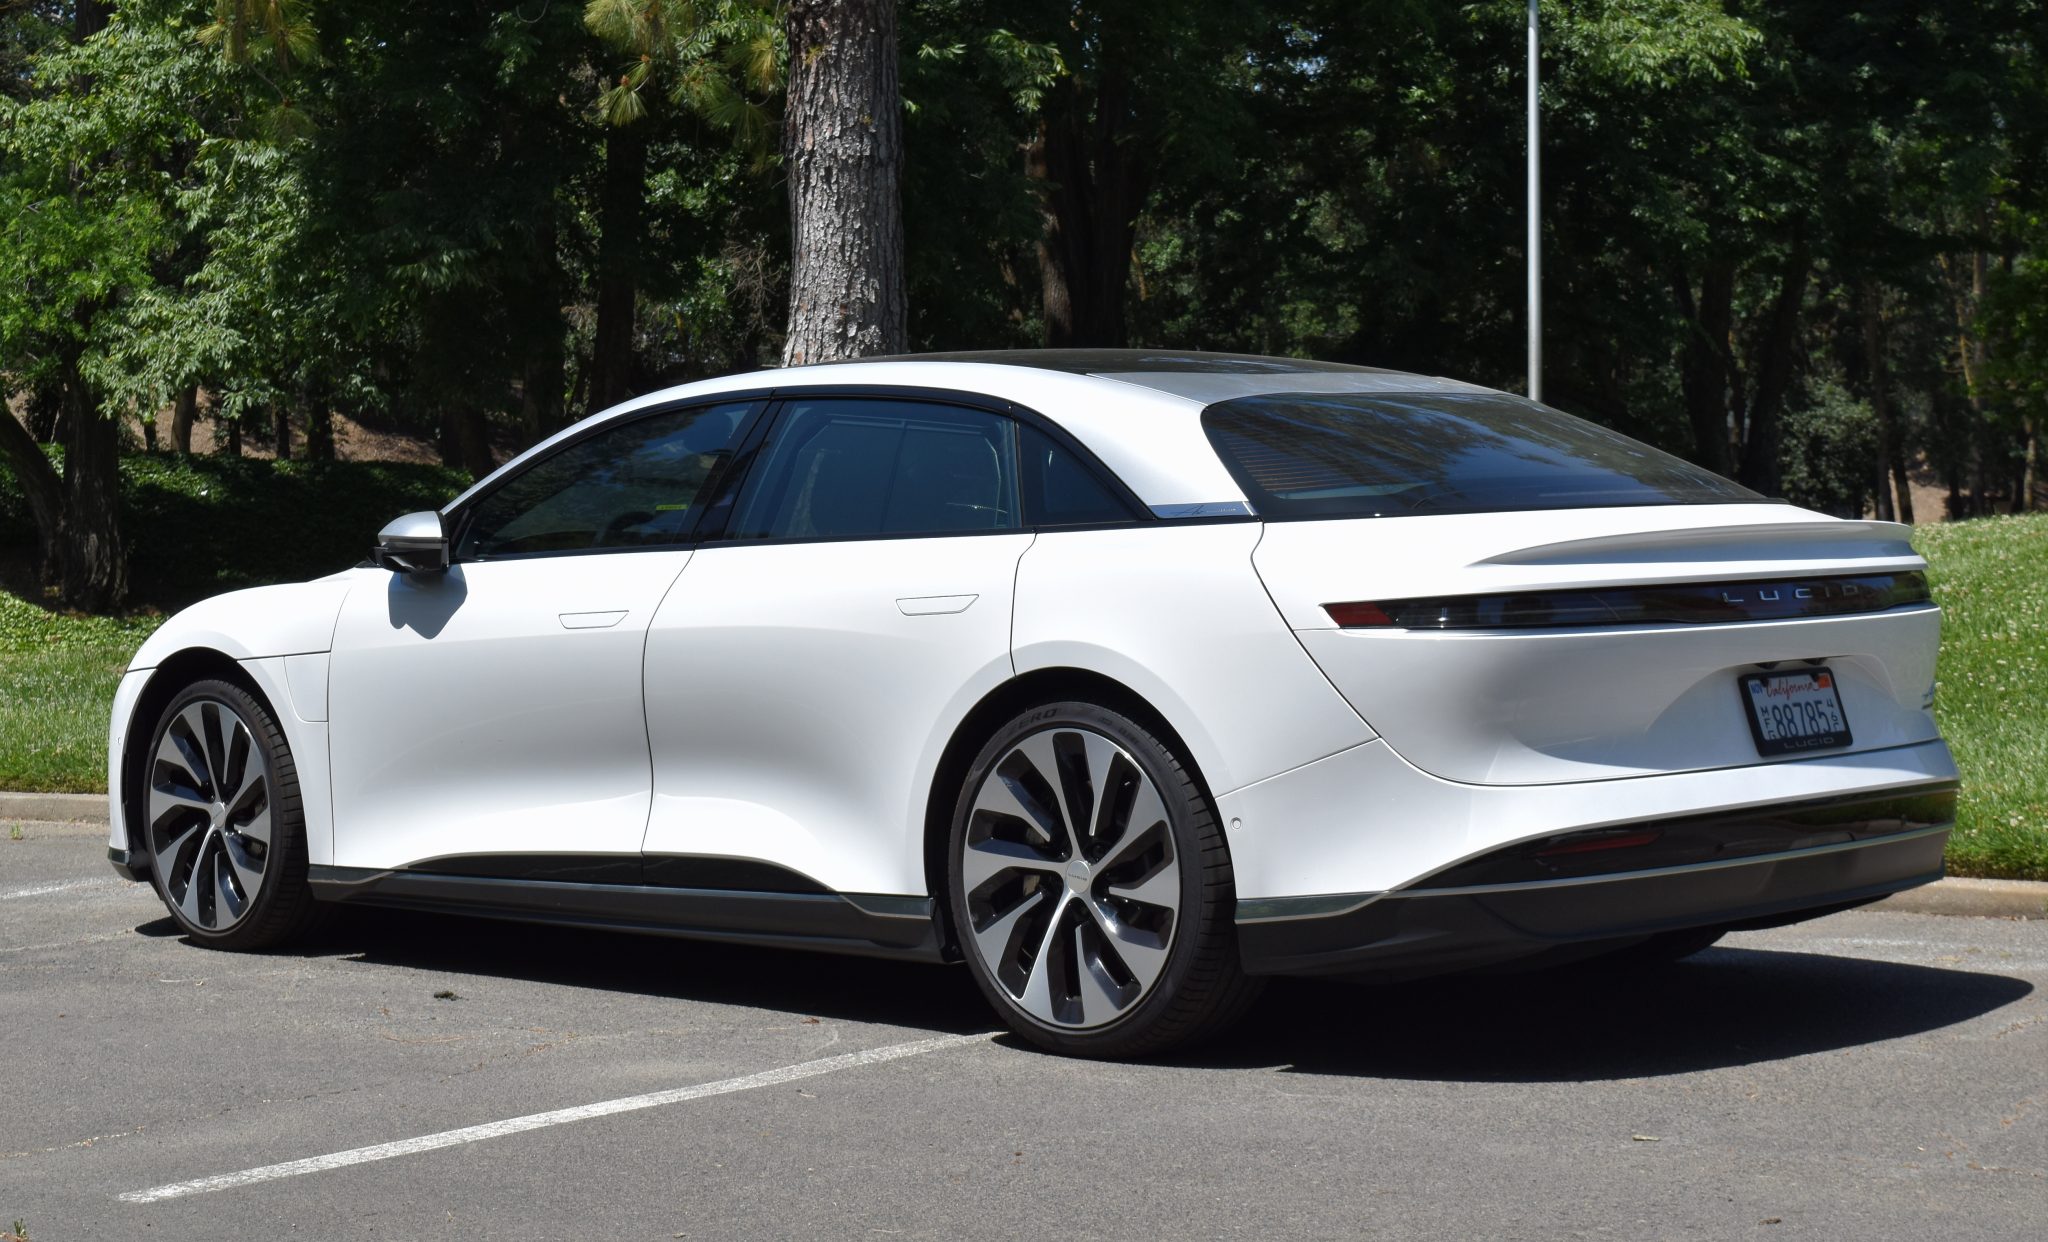 Handsome and wide-bodied, the Lucid Air Grand Touring has optional 21-inch wheels.